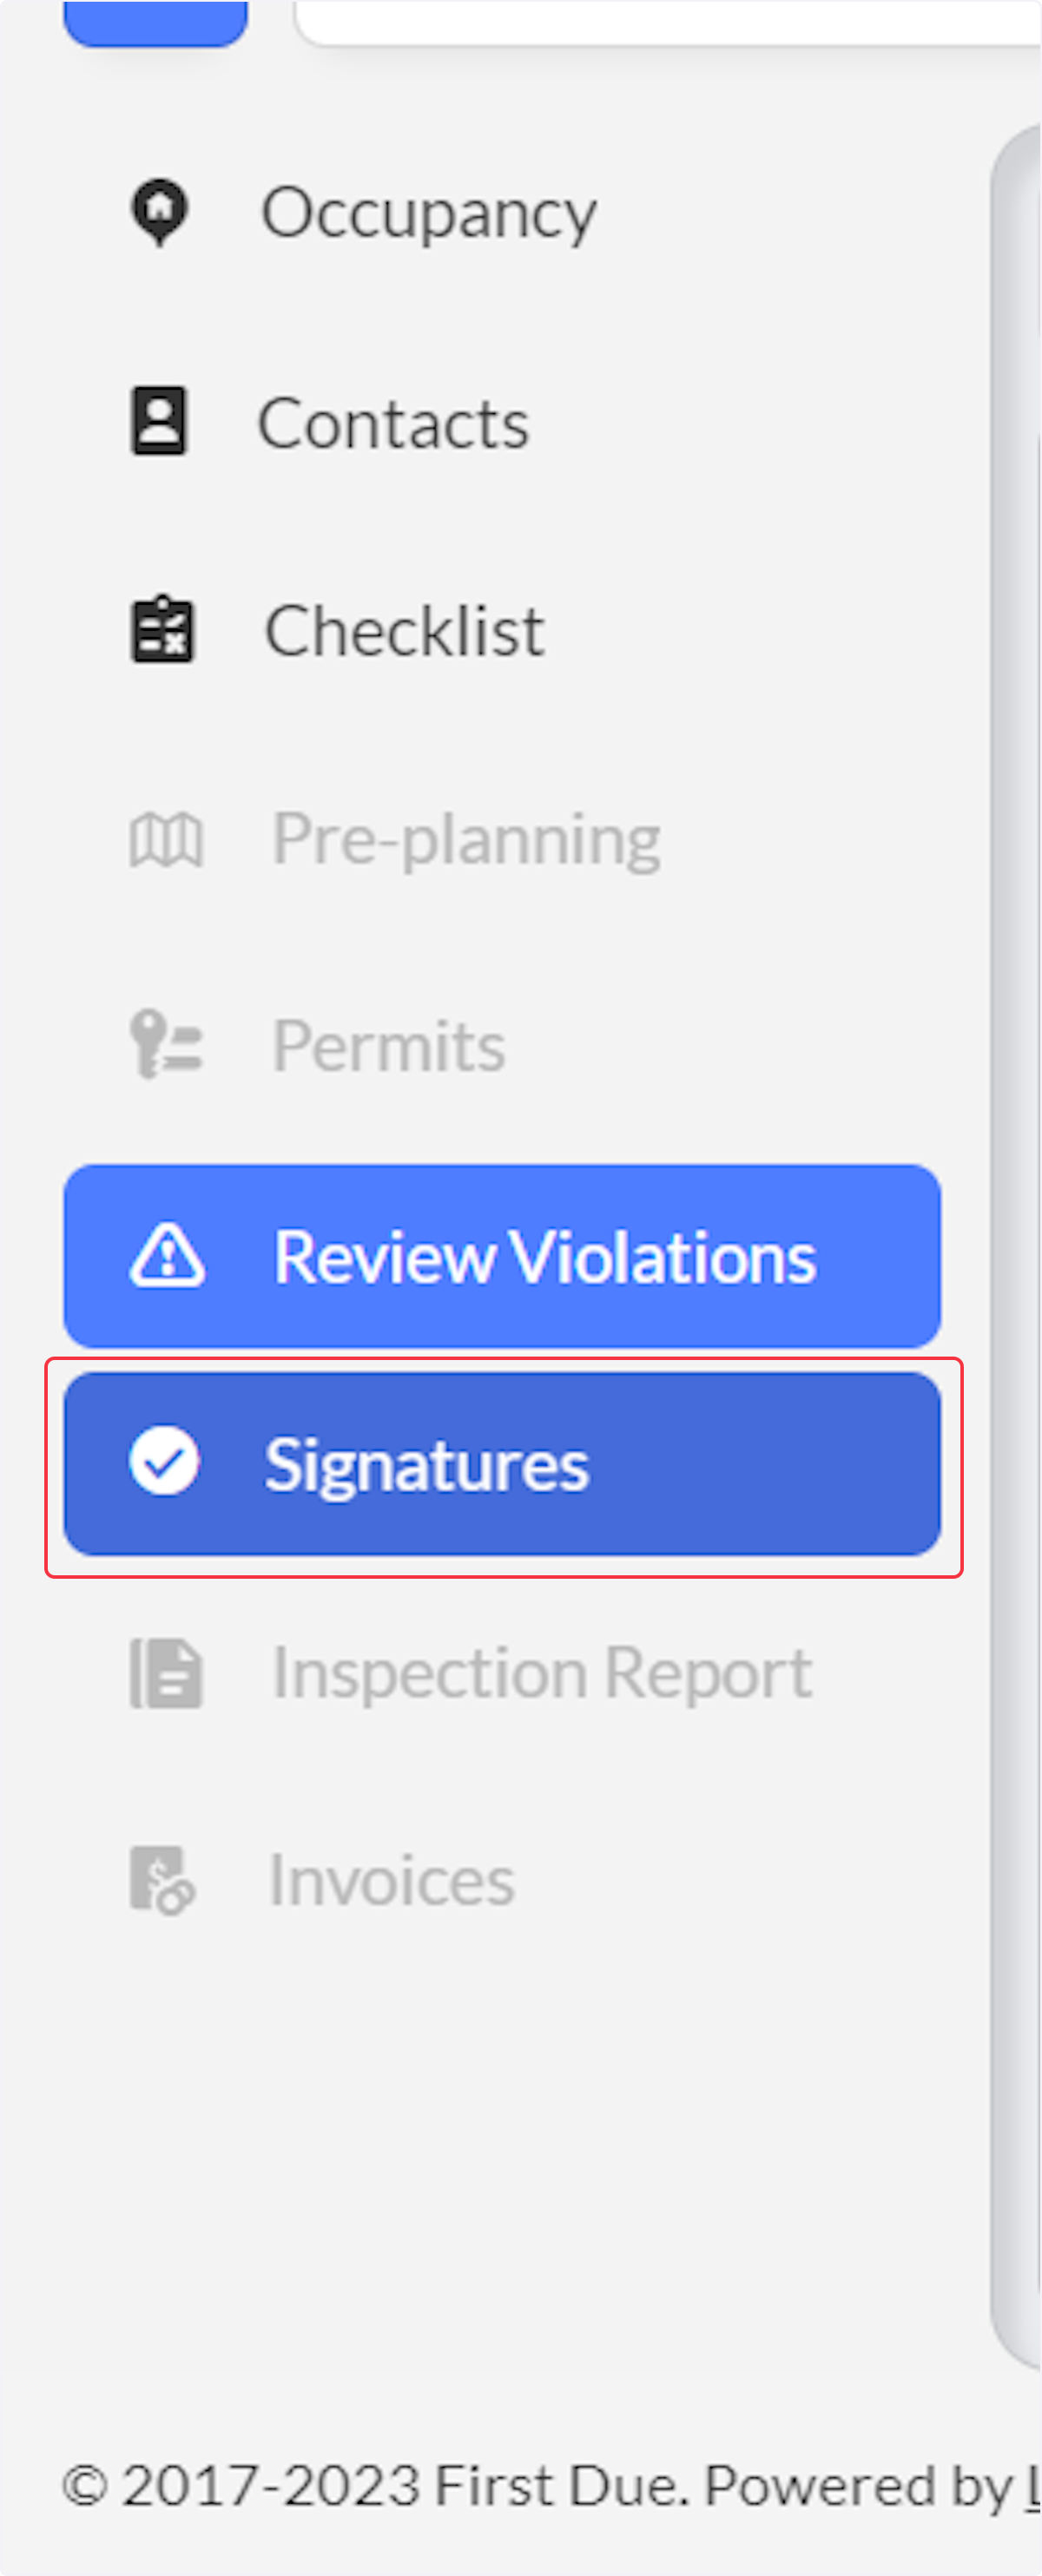 Click on Signatures and enter signatures as required for the Inspection.